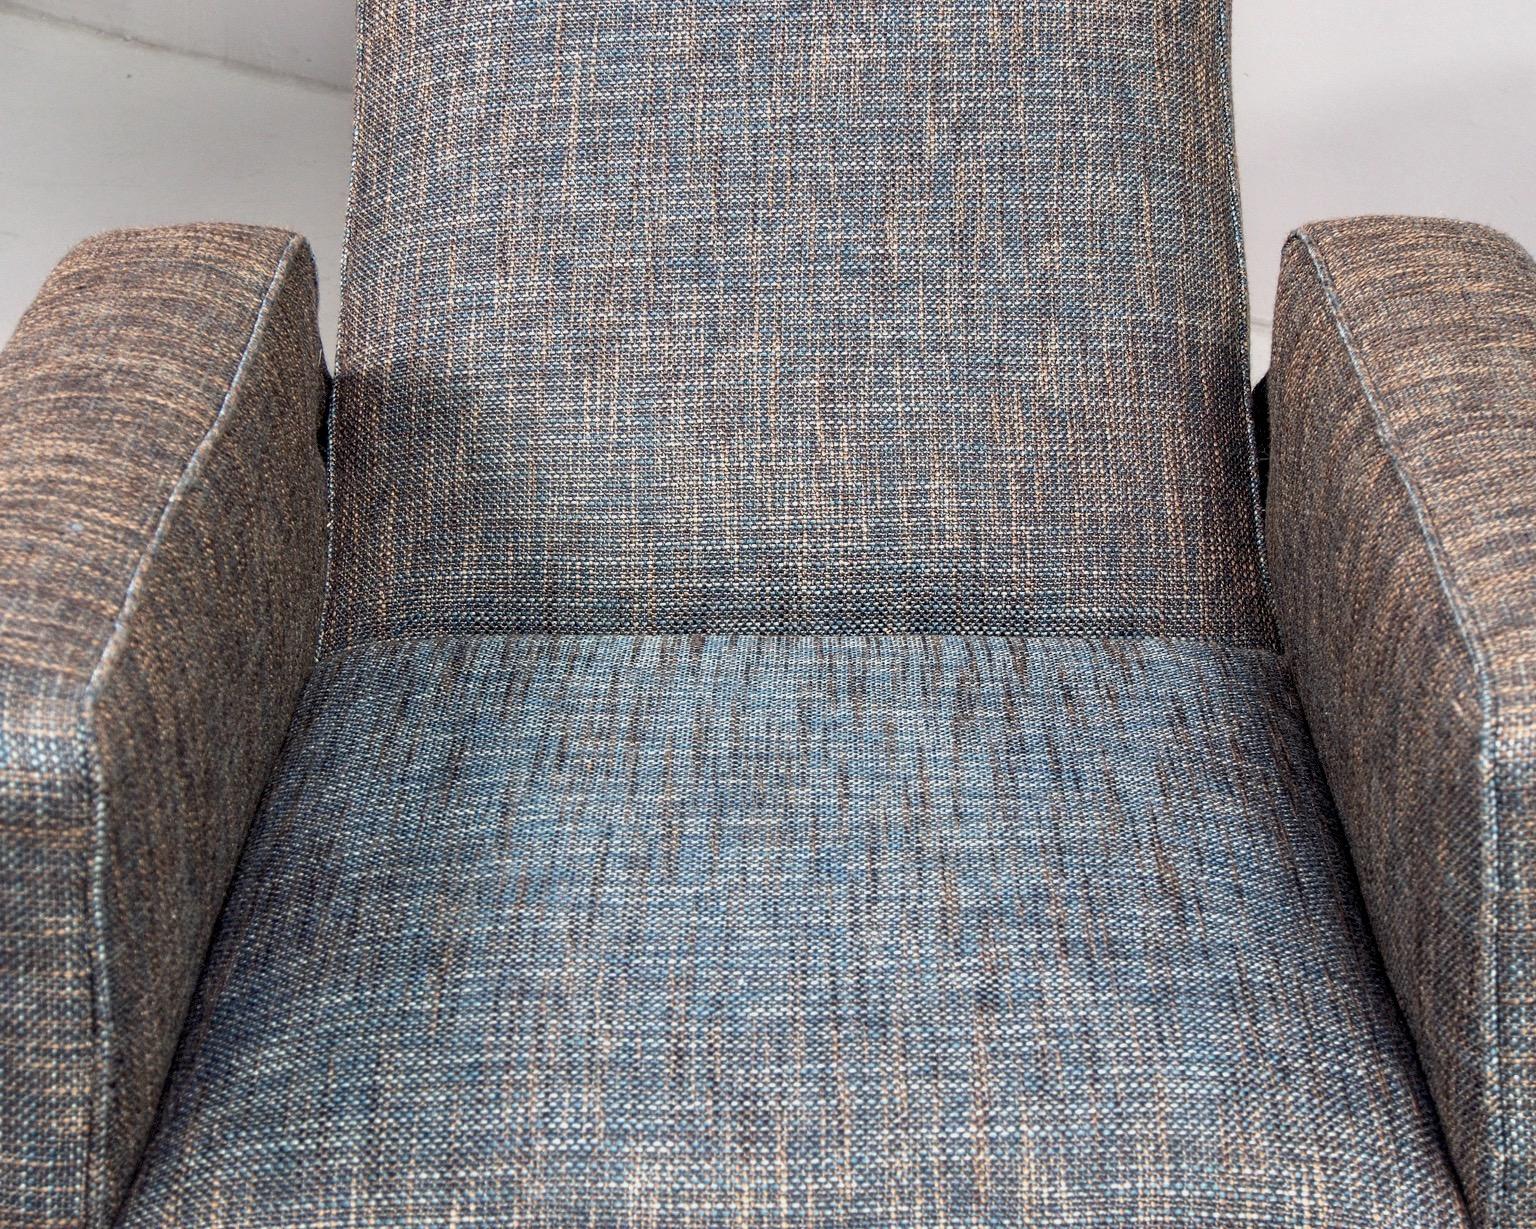 20th Century Pair of Italian Midcentury Lounge Chairs with New Tweed Upholstery